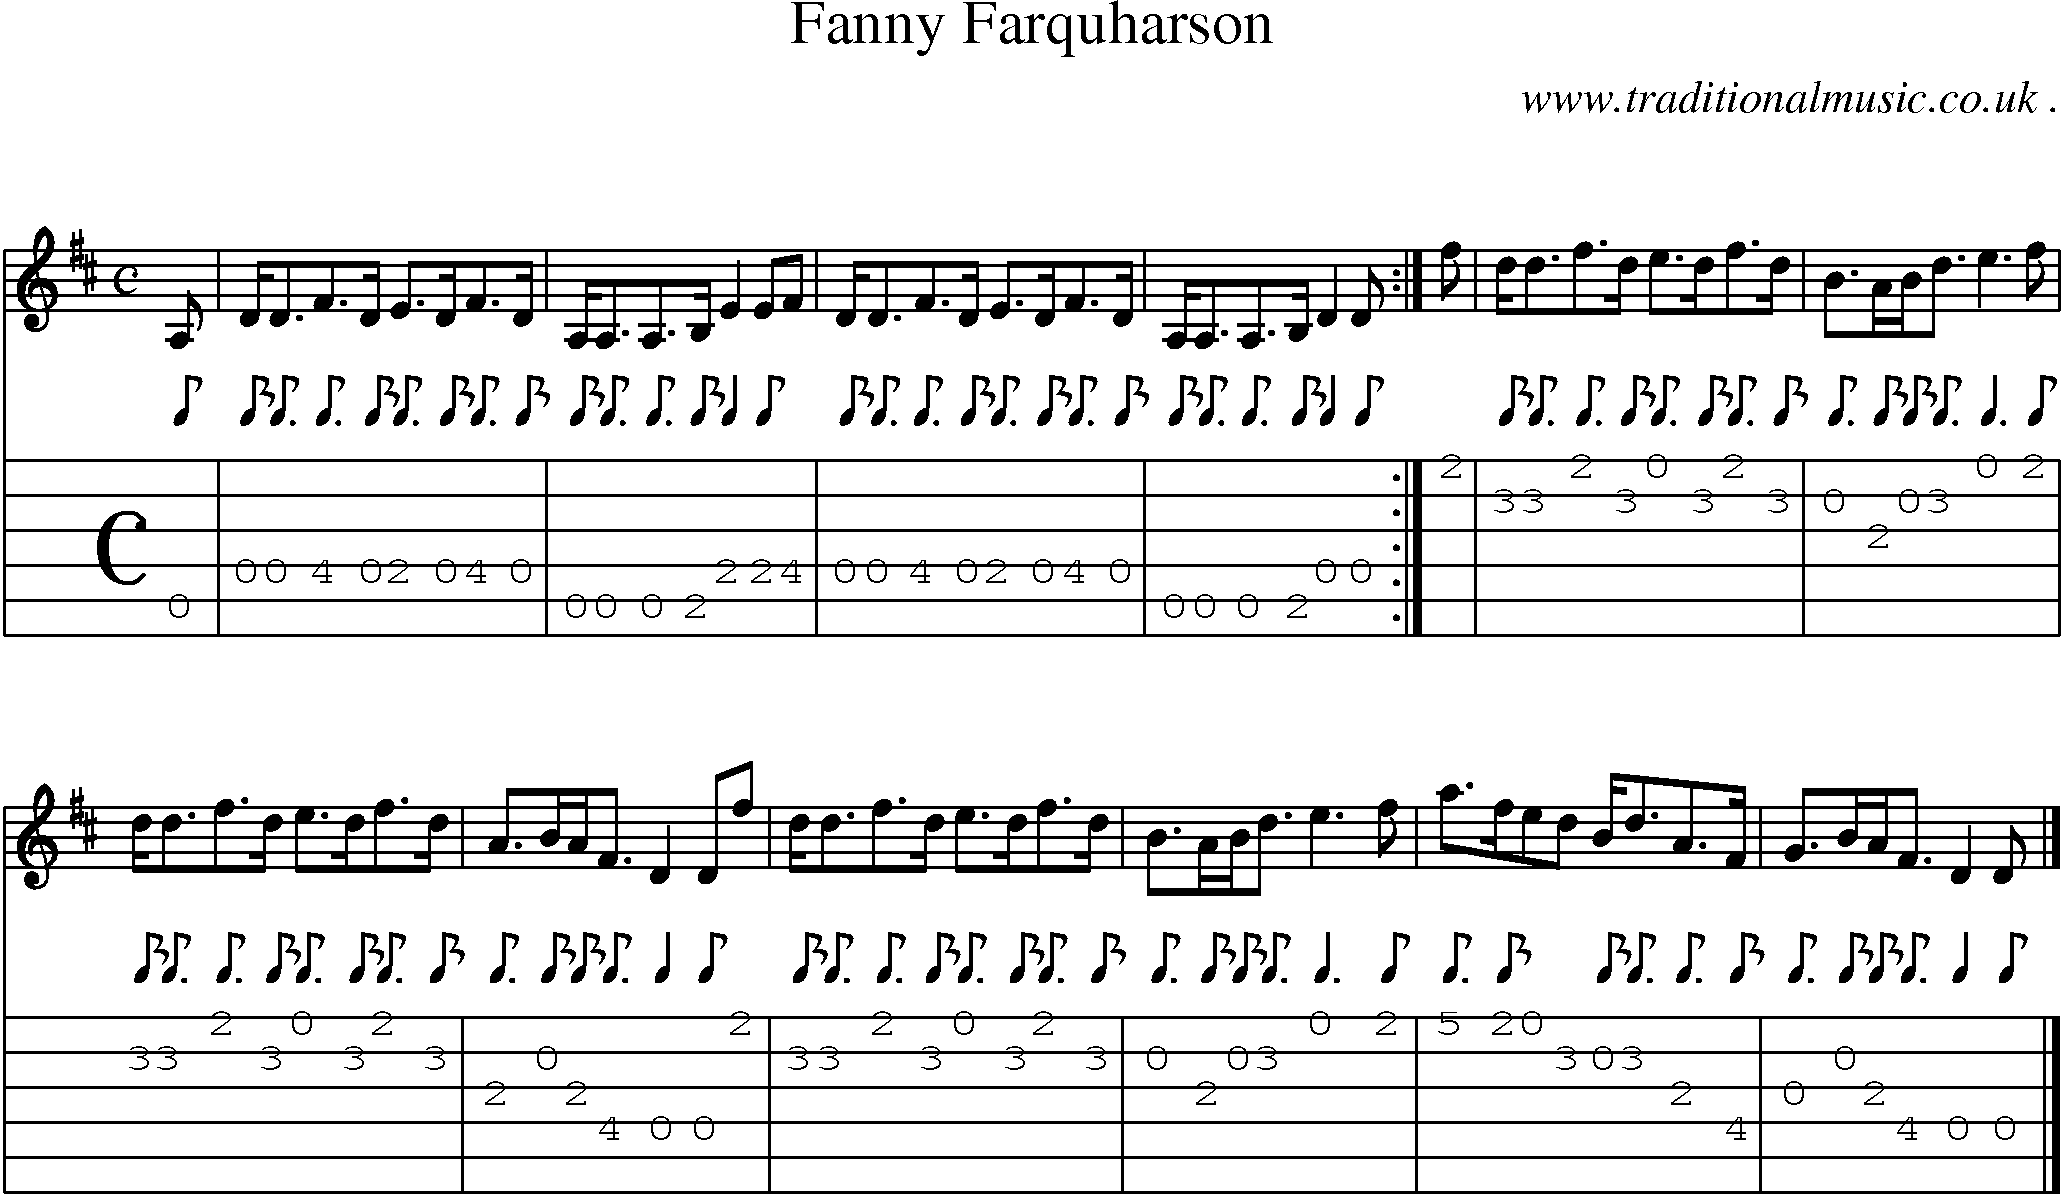 Sheet-music  score, Chords and Guitar Tabs for Fanny Farquharson